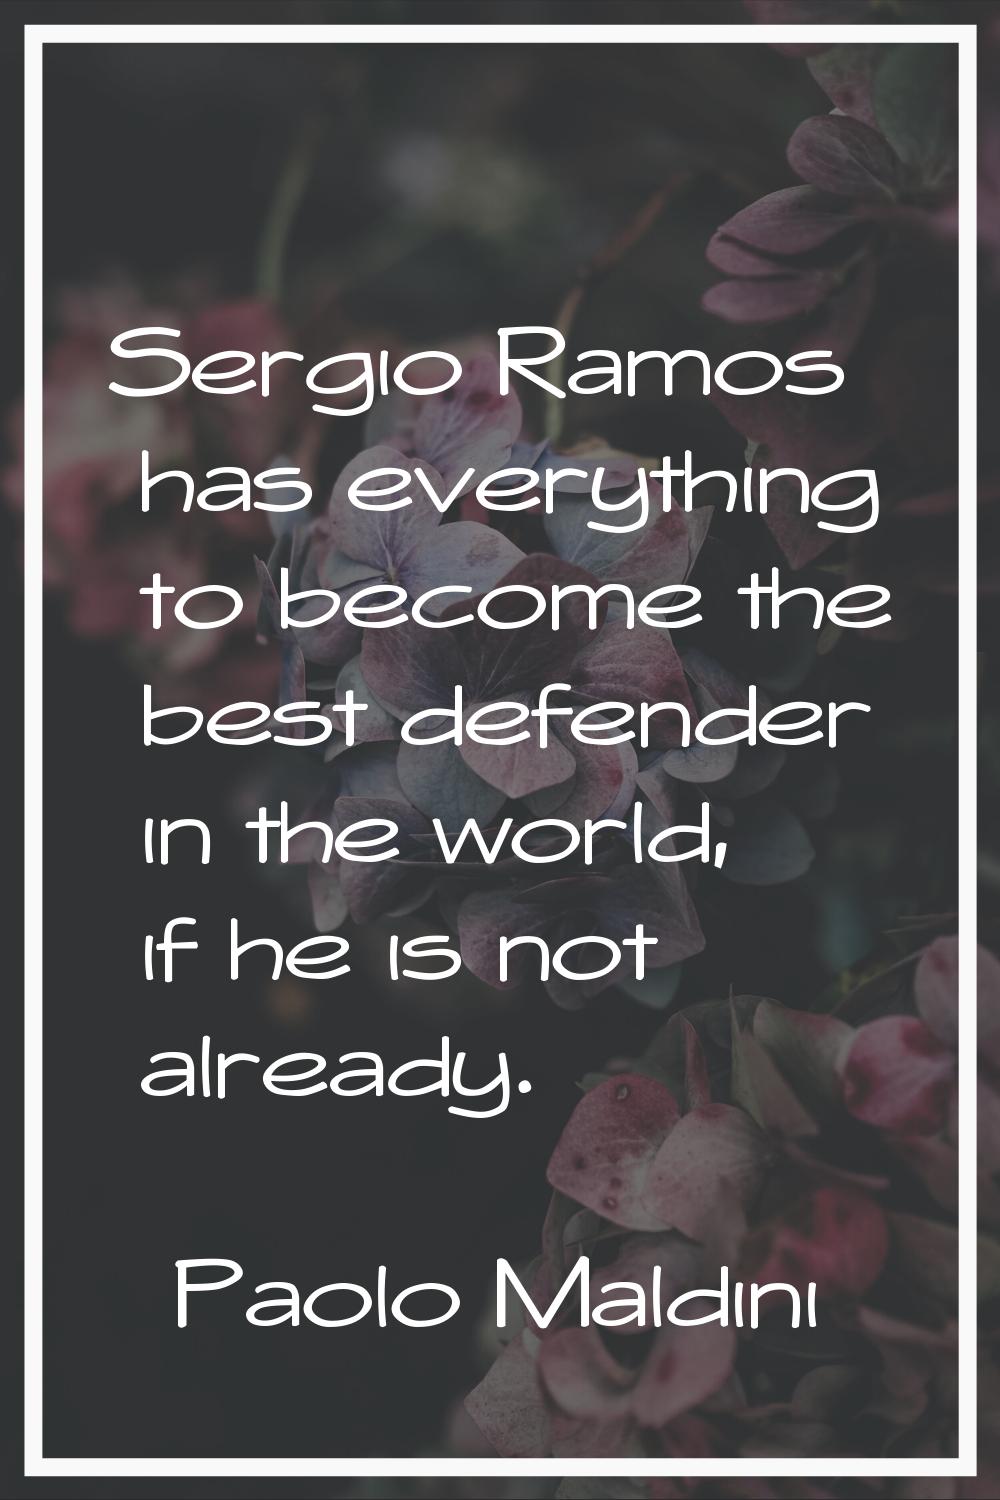 Sergio Ramos has everything to become the best defender in the world, if he is not already.